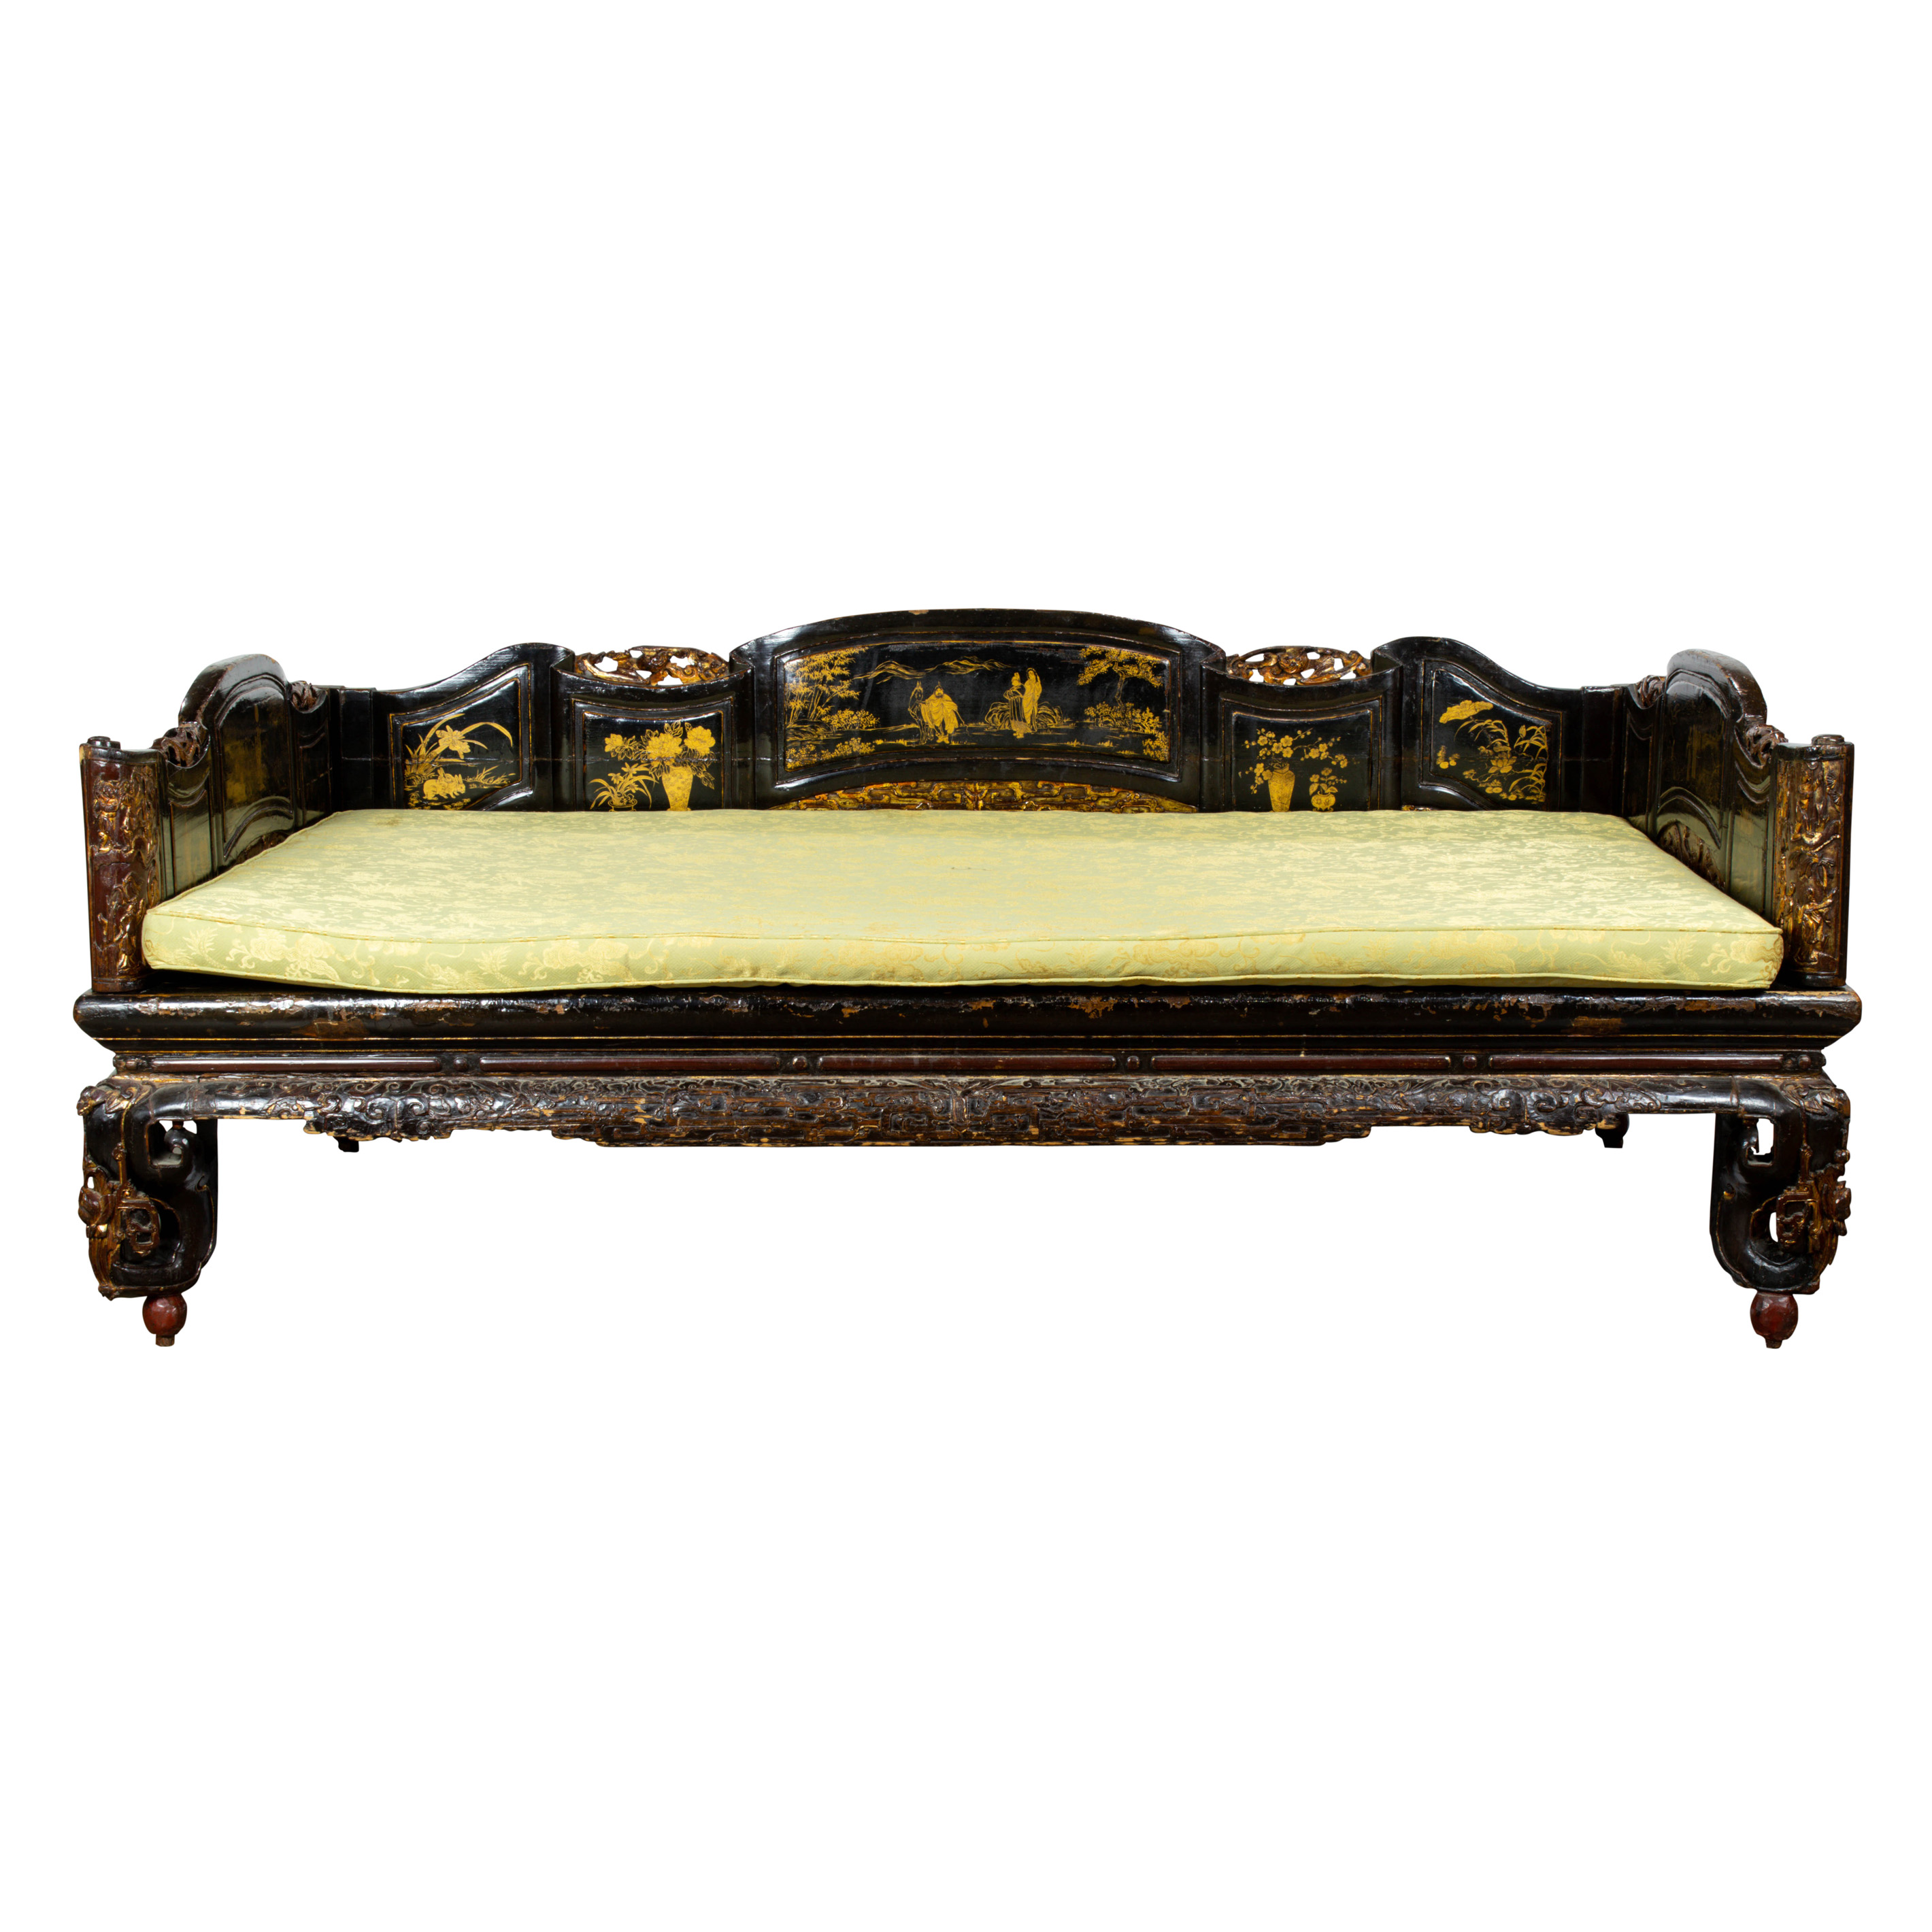 CHINESE GILT-LACQUERED DAYBED Chinese